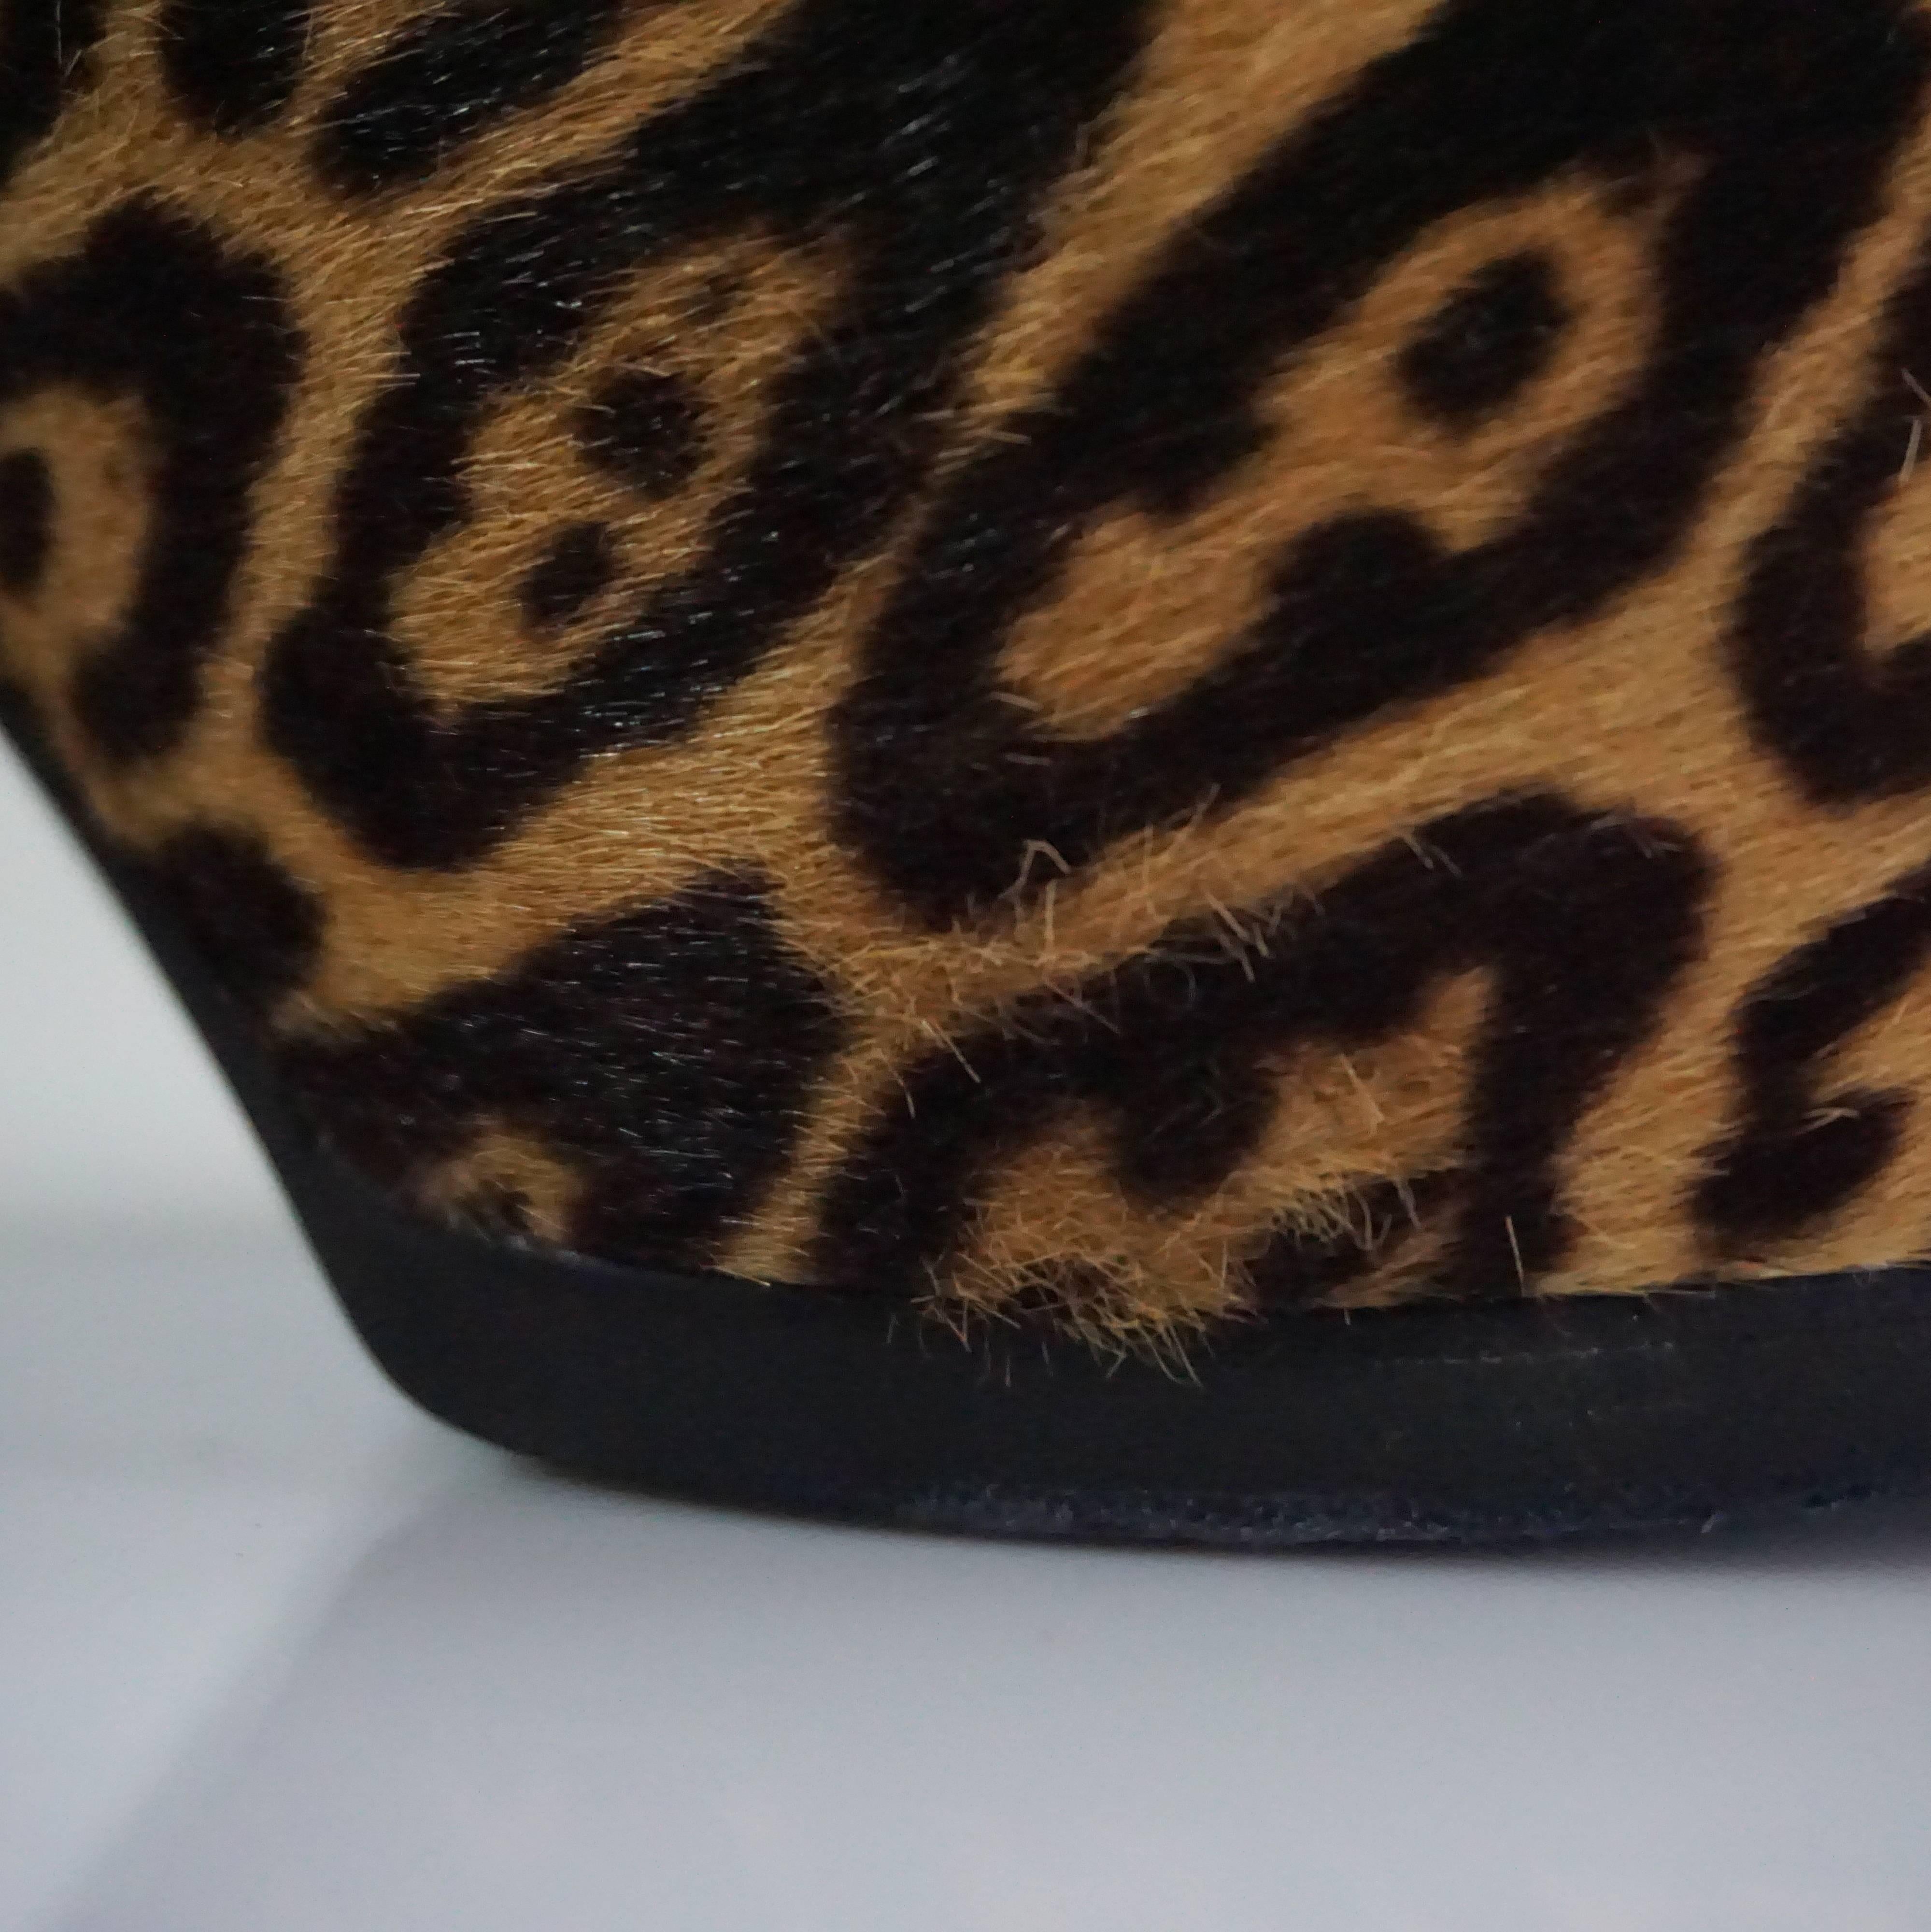 Yves Saint Laurent Animal Print Pony Hair Pumps - 40 In Good Condition For Sale In West Palm Beach, FL